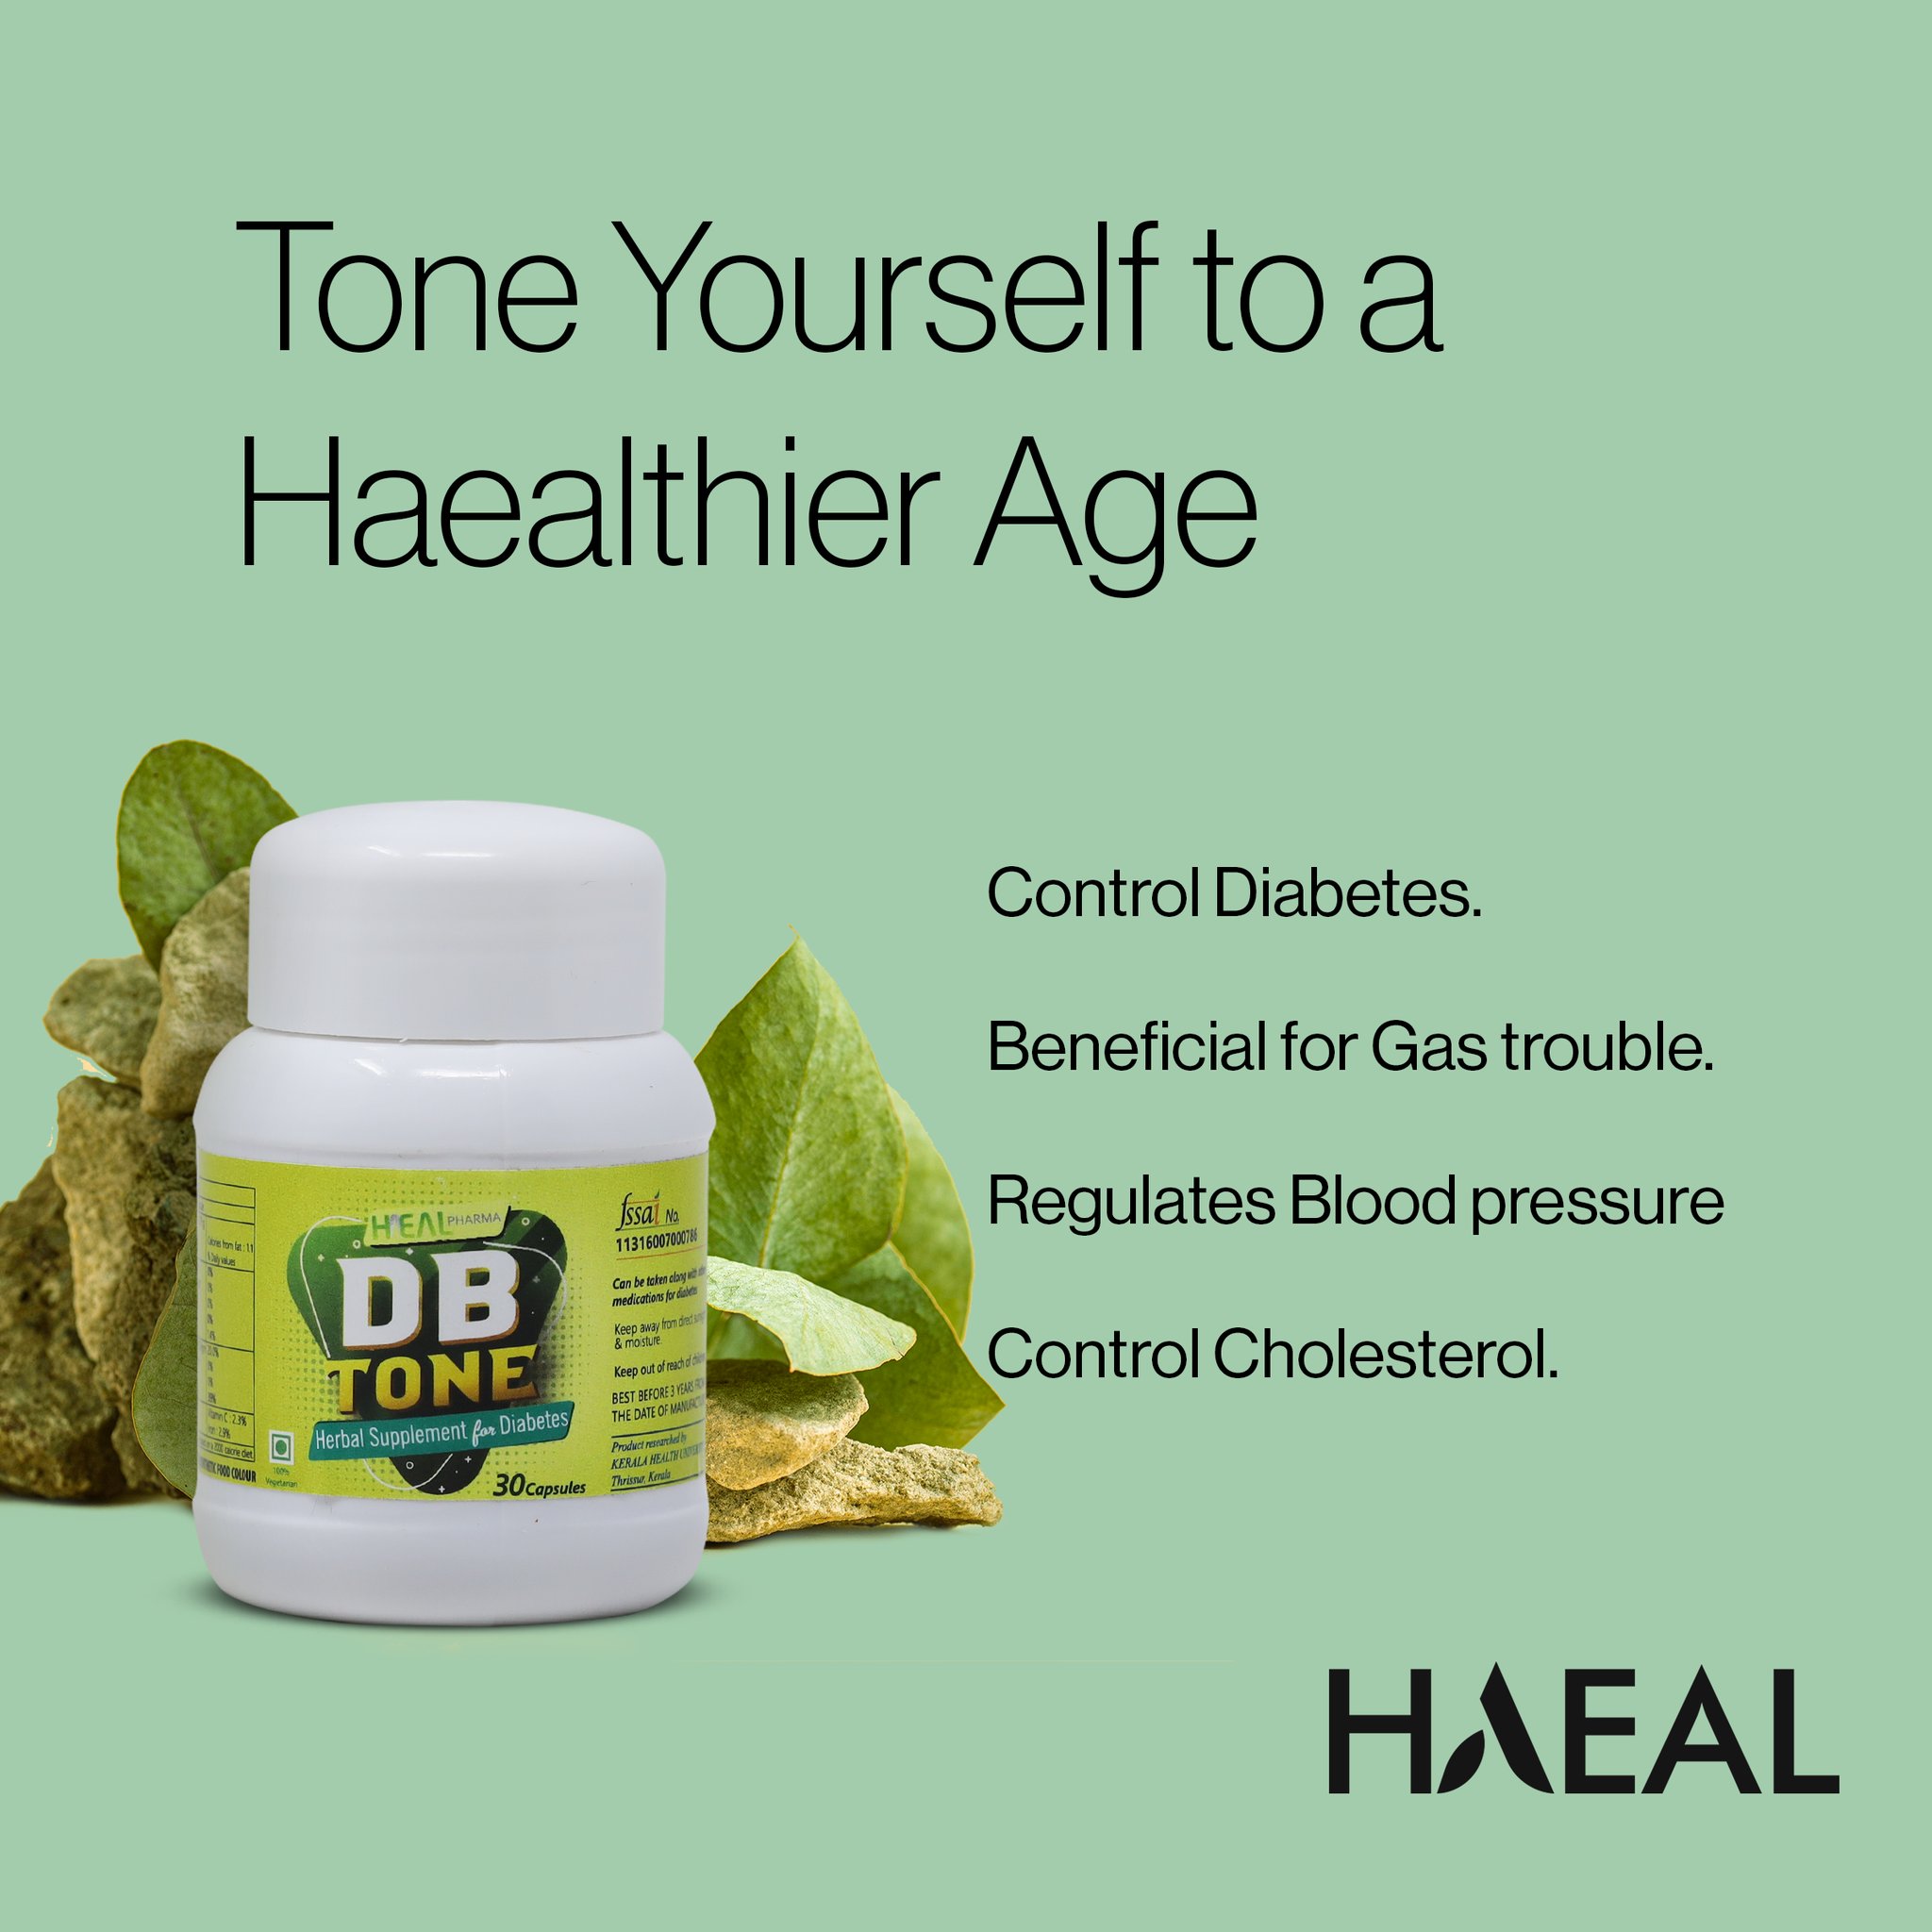 vene Summen Våbenstilstand Haeal on Twitter: "Age into a healthier life with Haeal DB Tone Capsules.  An ayurvedic solution for Diabetes, Gas trouble, Blood Pressure &amp;  Cholesterol. #letshaeal #haealwellness #wellbeing #wellness  #lifeisbeautiful #healthylifestyle #dbtone #diet #